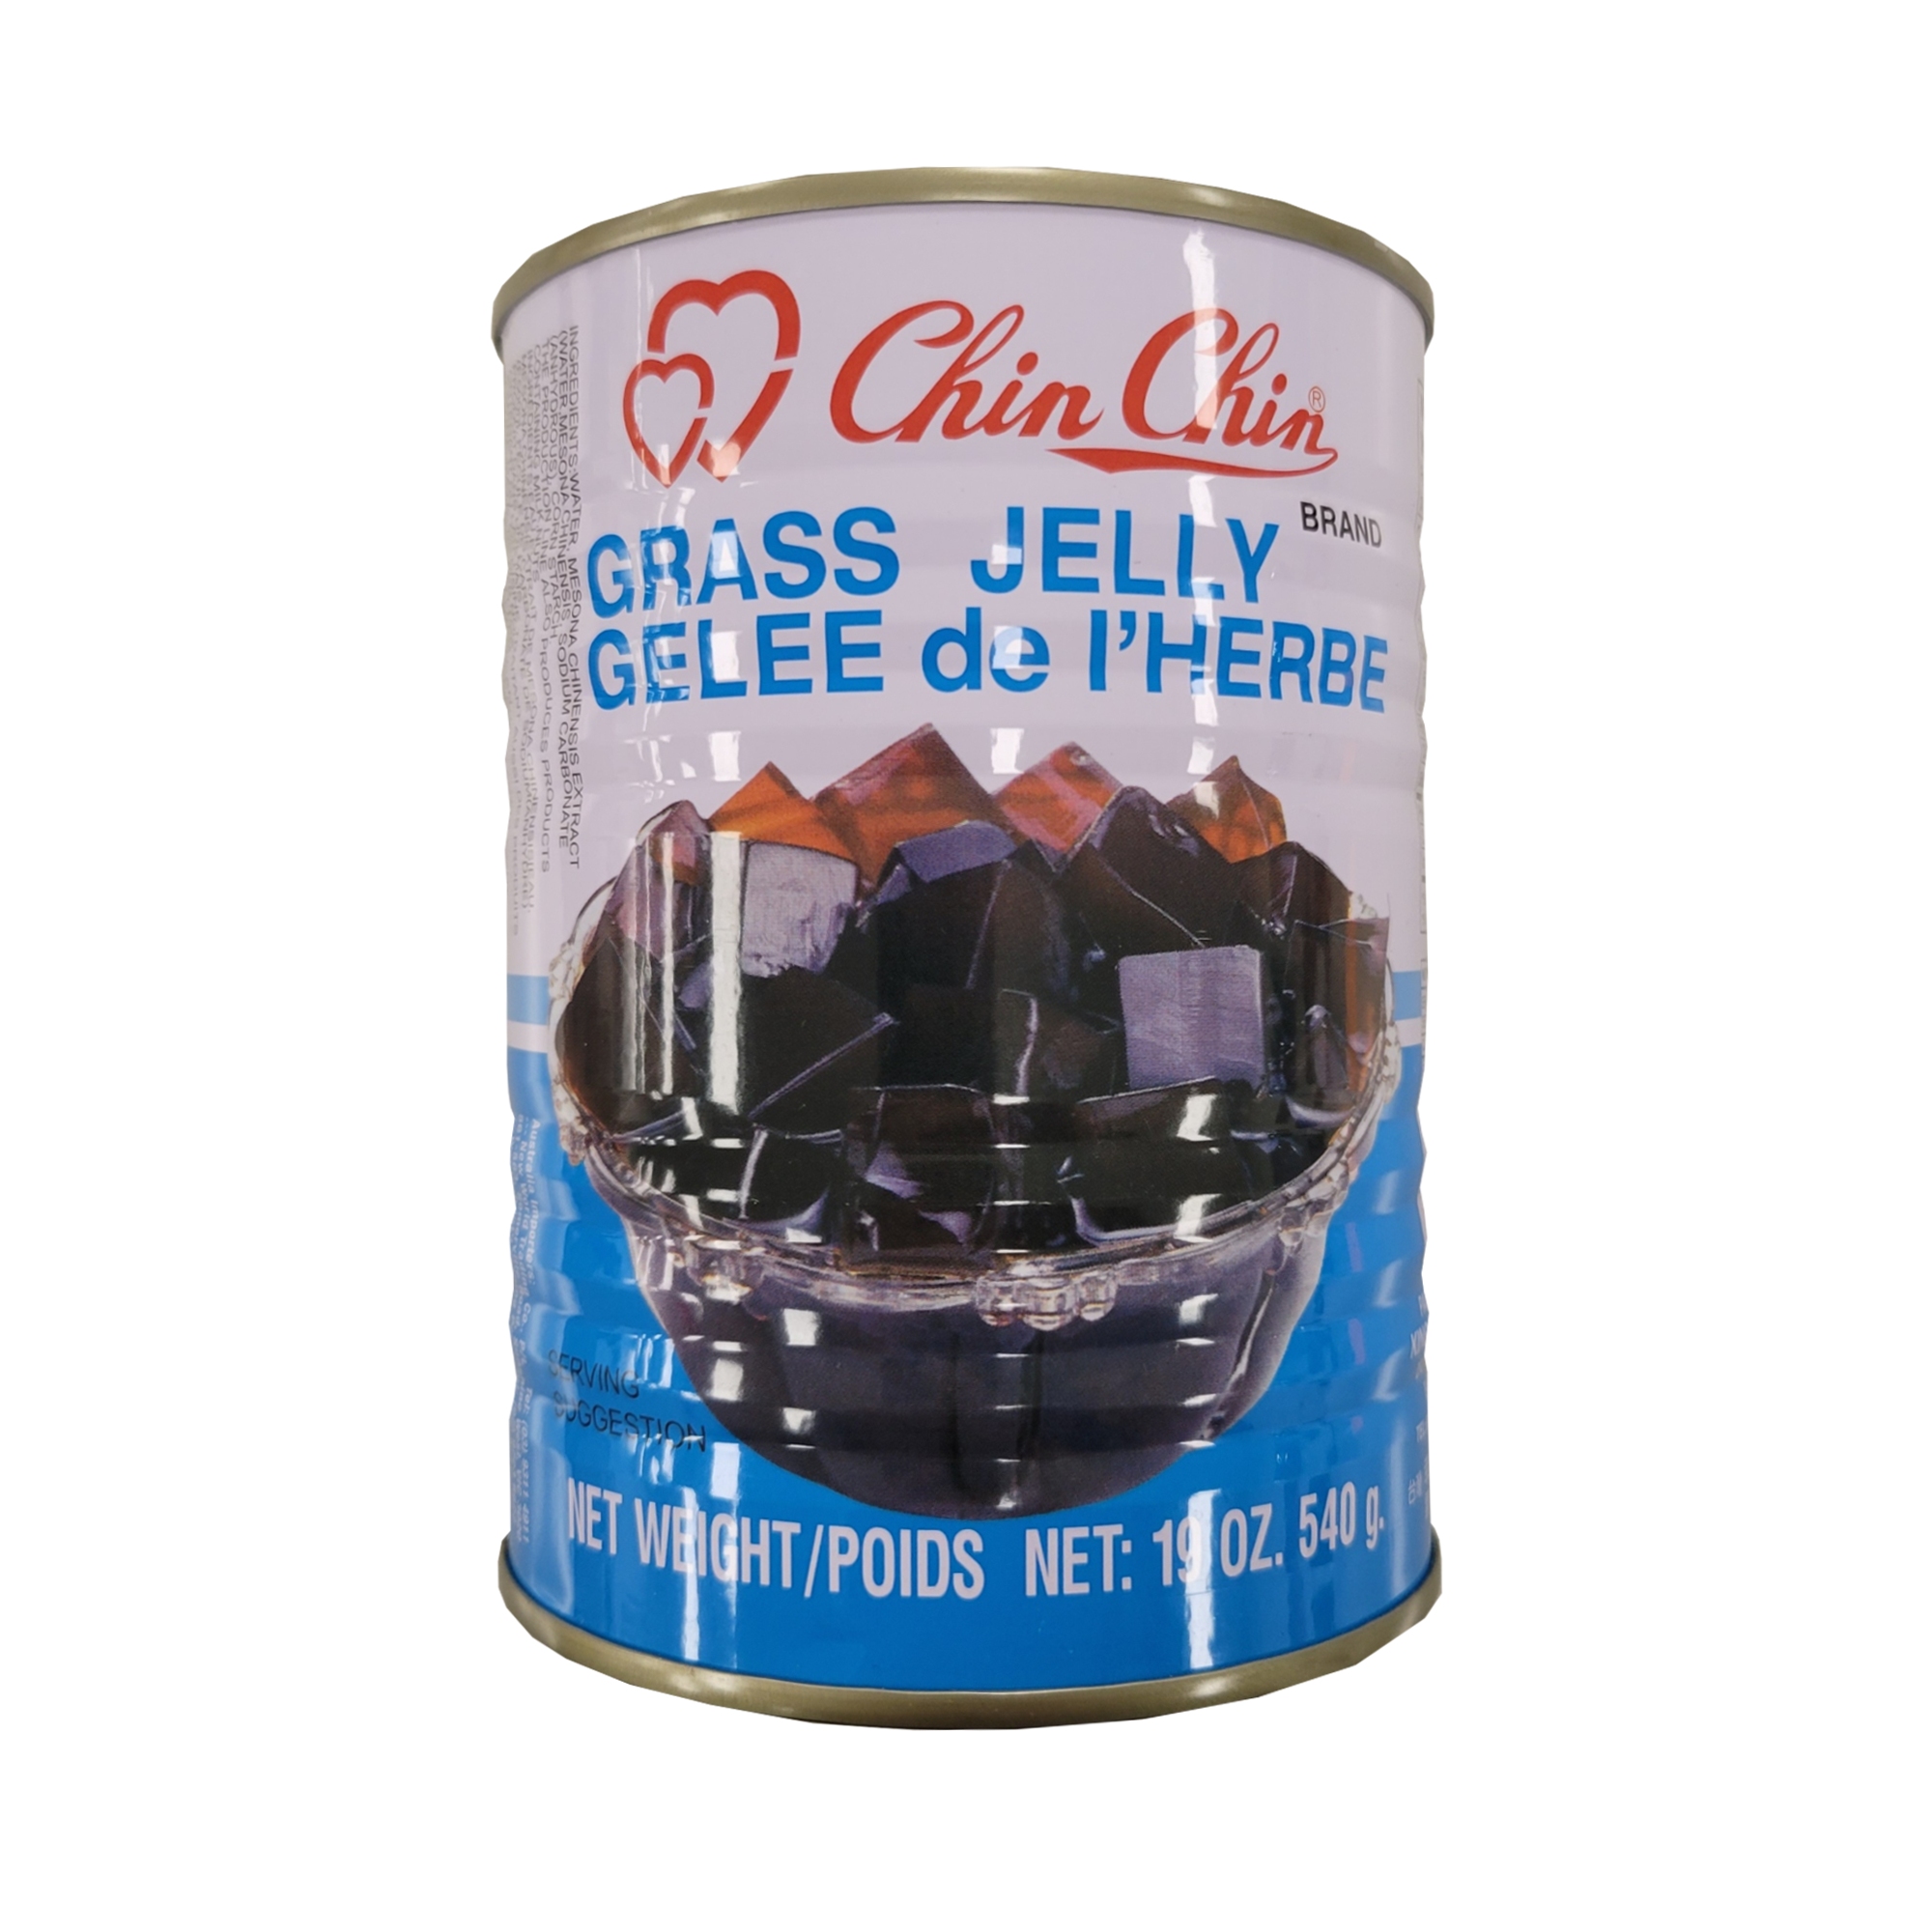 CHIN CHIN GRASS JELLY DR110200